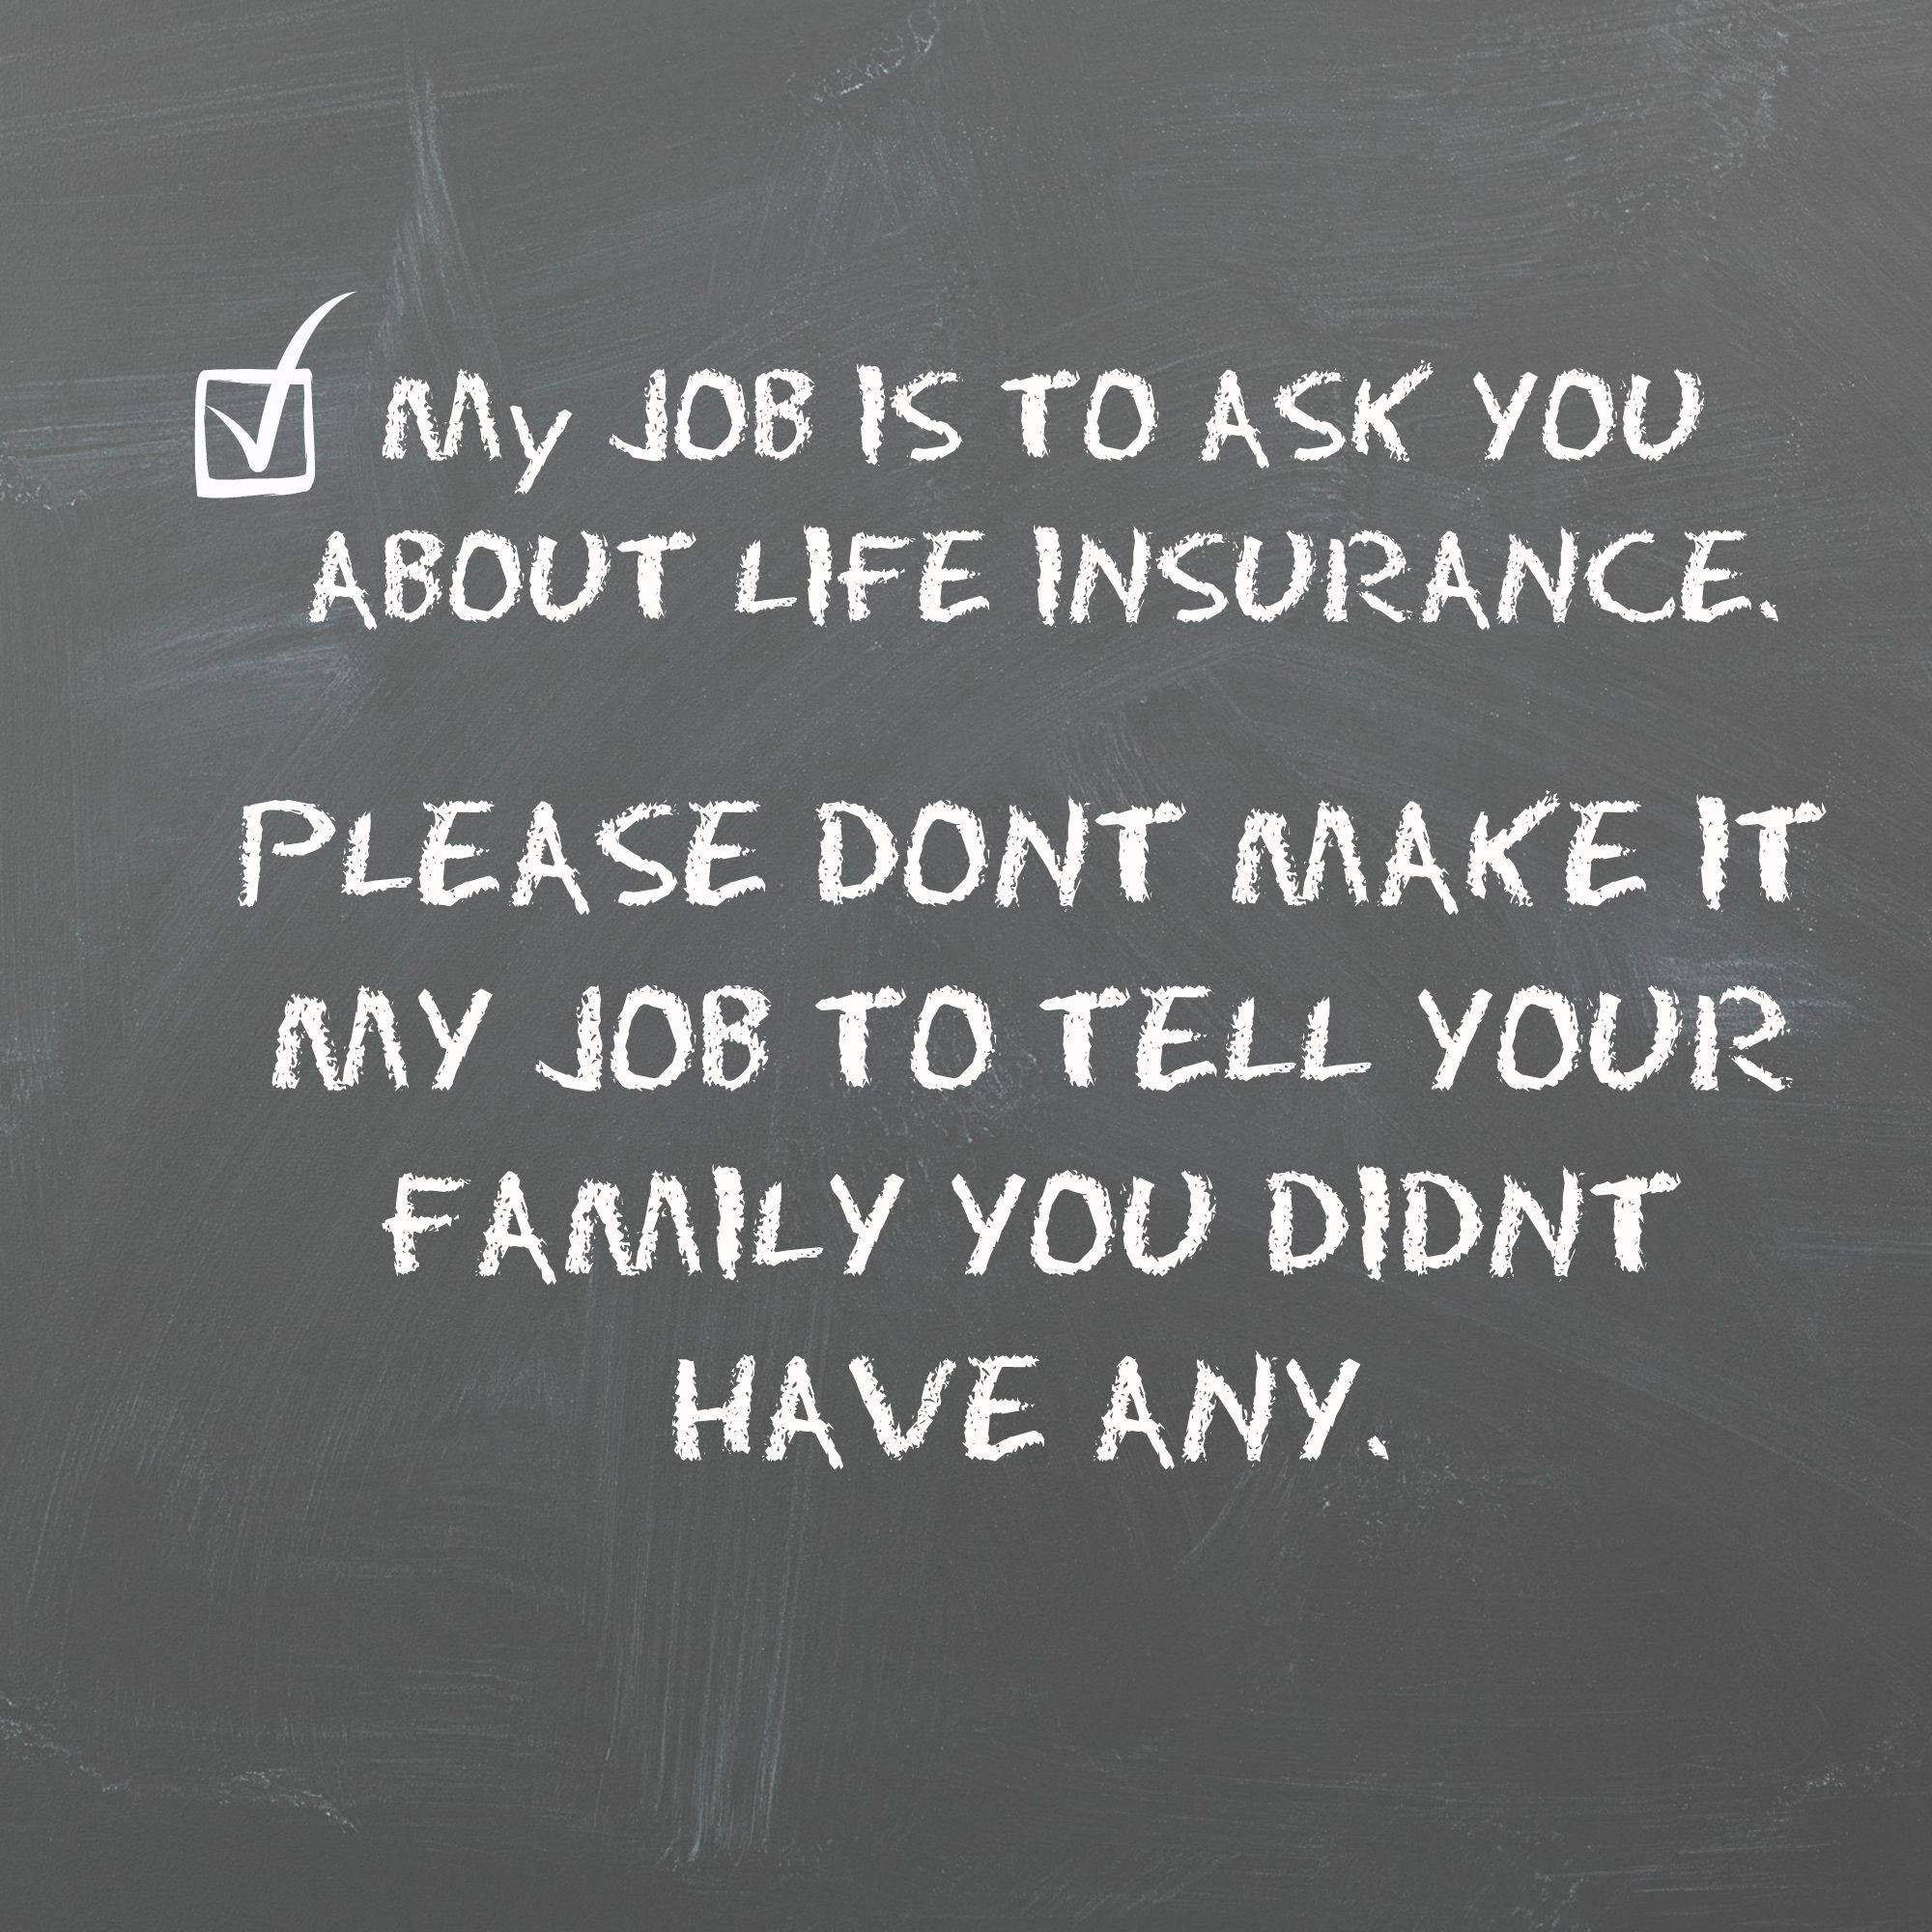 Quotes For Life Insurance
 Call us for any LifeInsurance questions that you have at